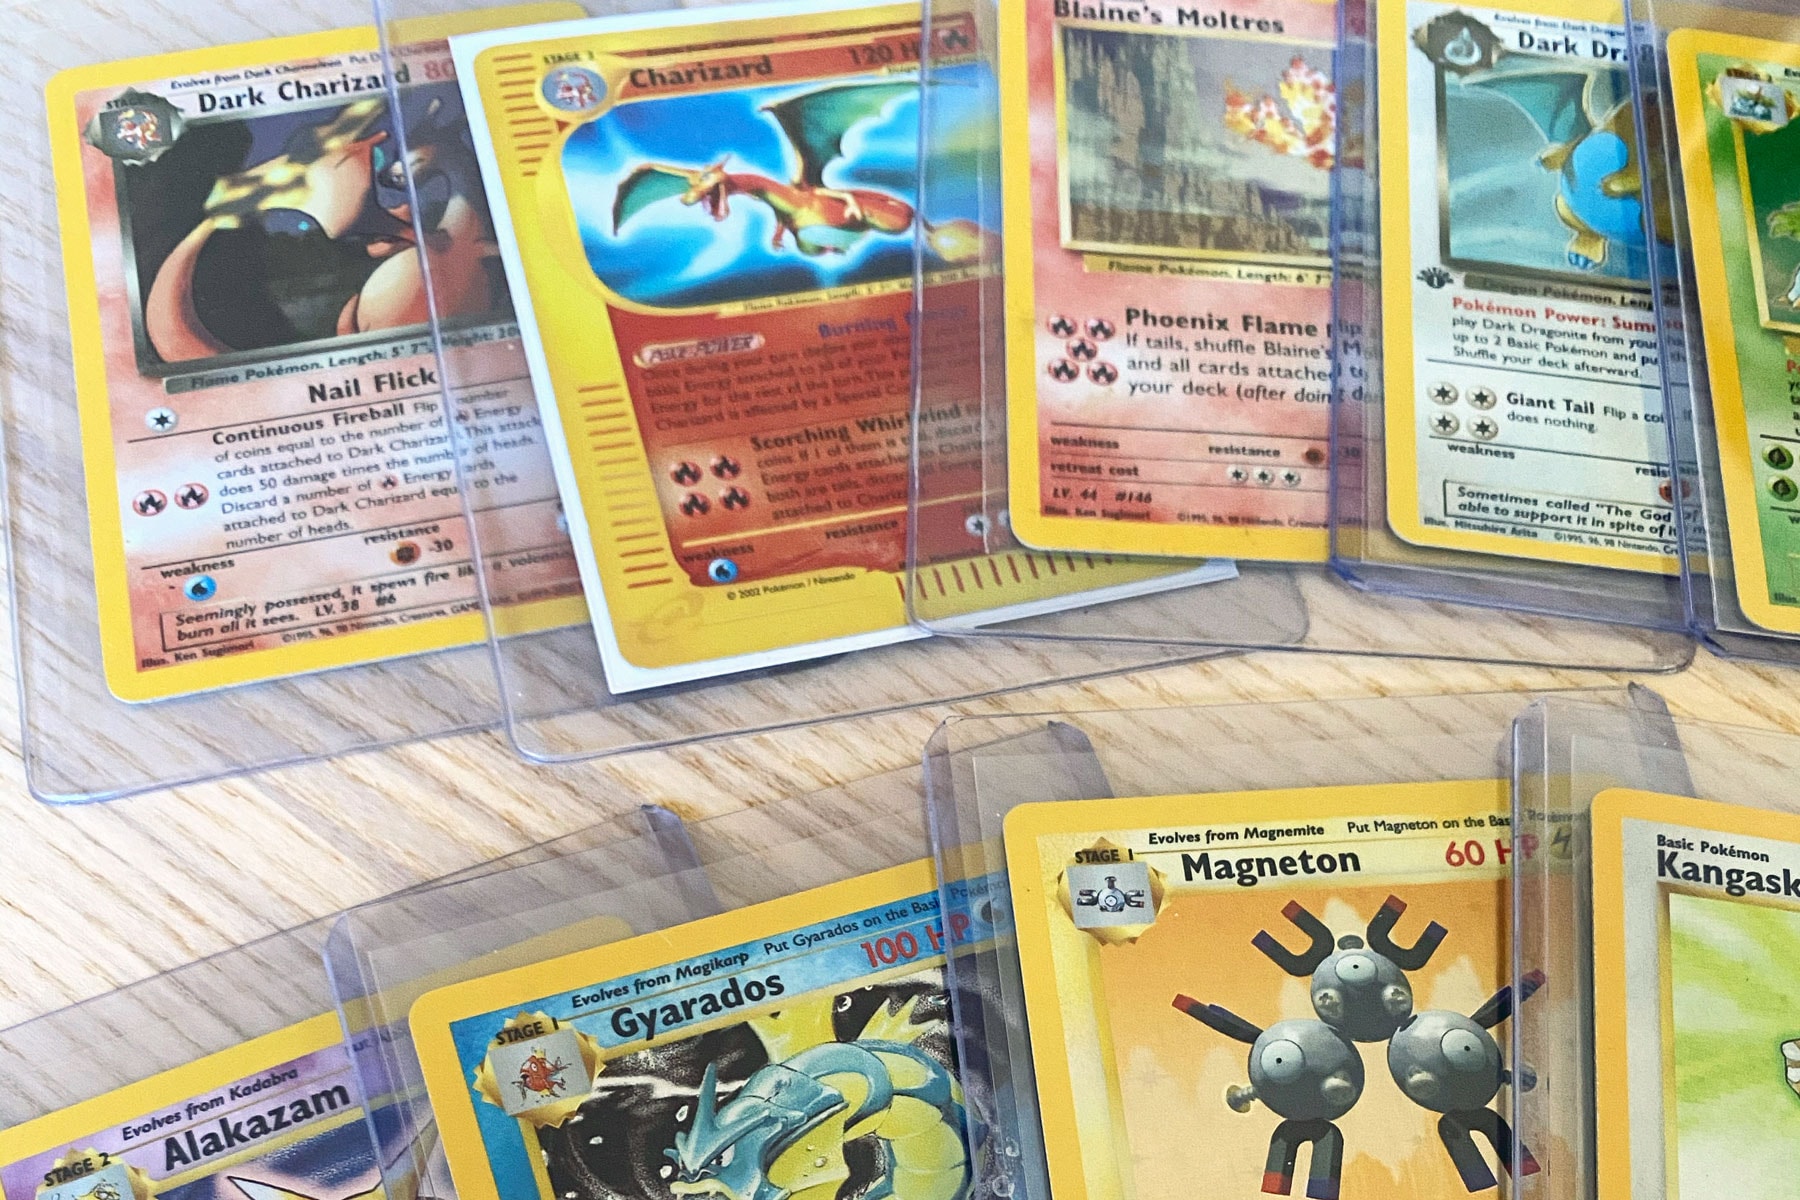 my friend thinks putting cards upside down in a toploader is better. :  r/PokemonTCG